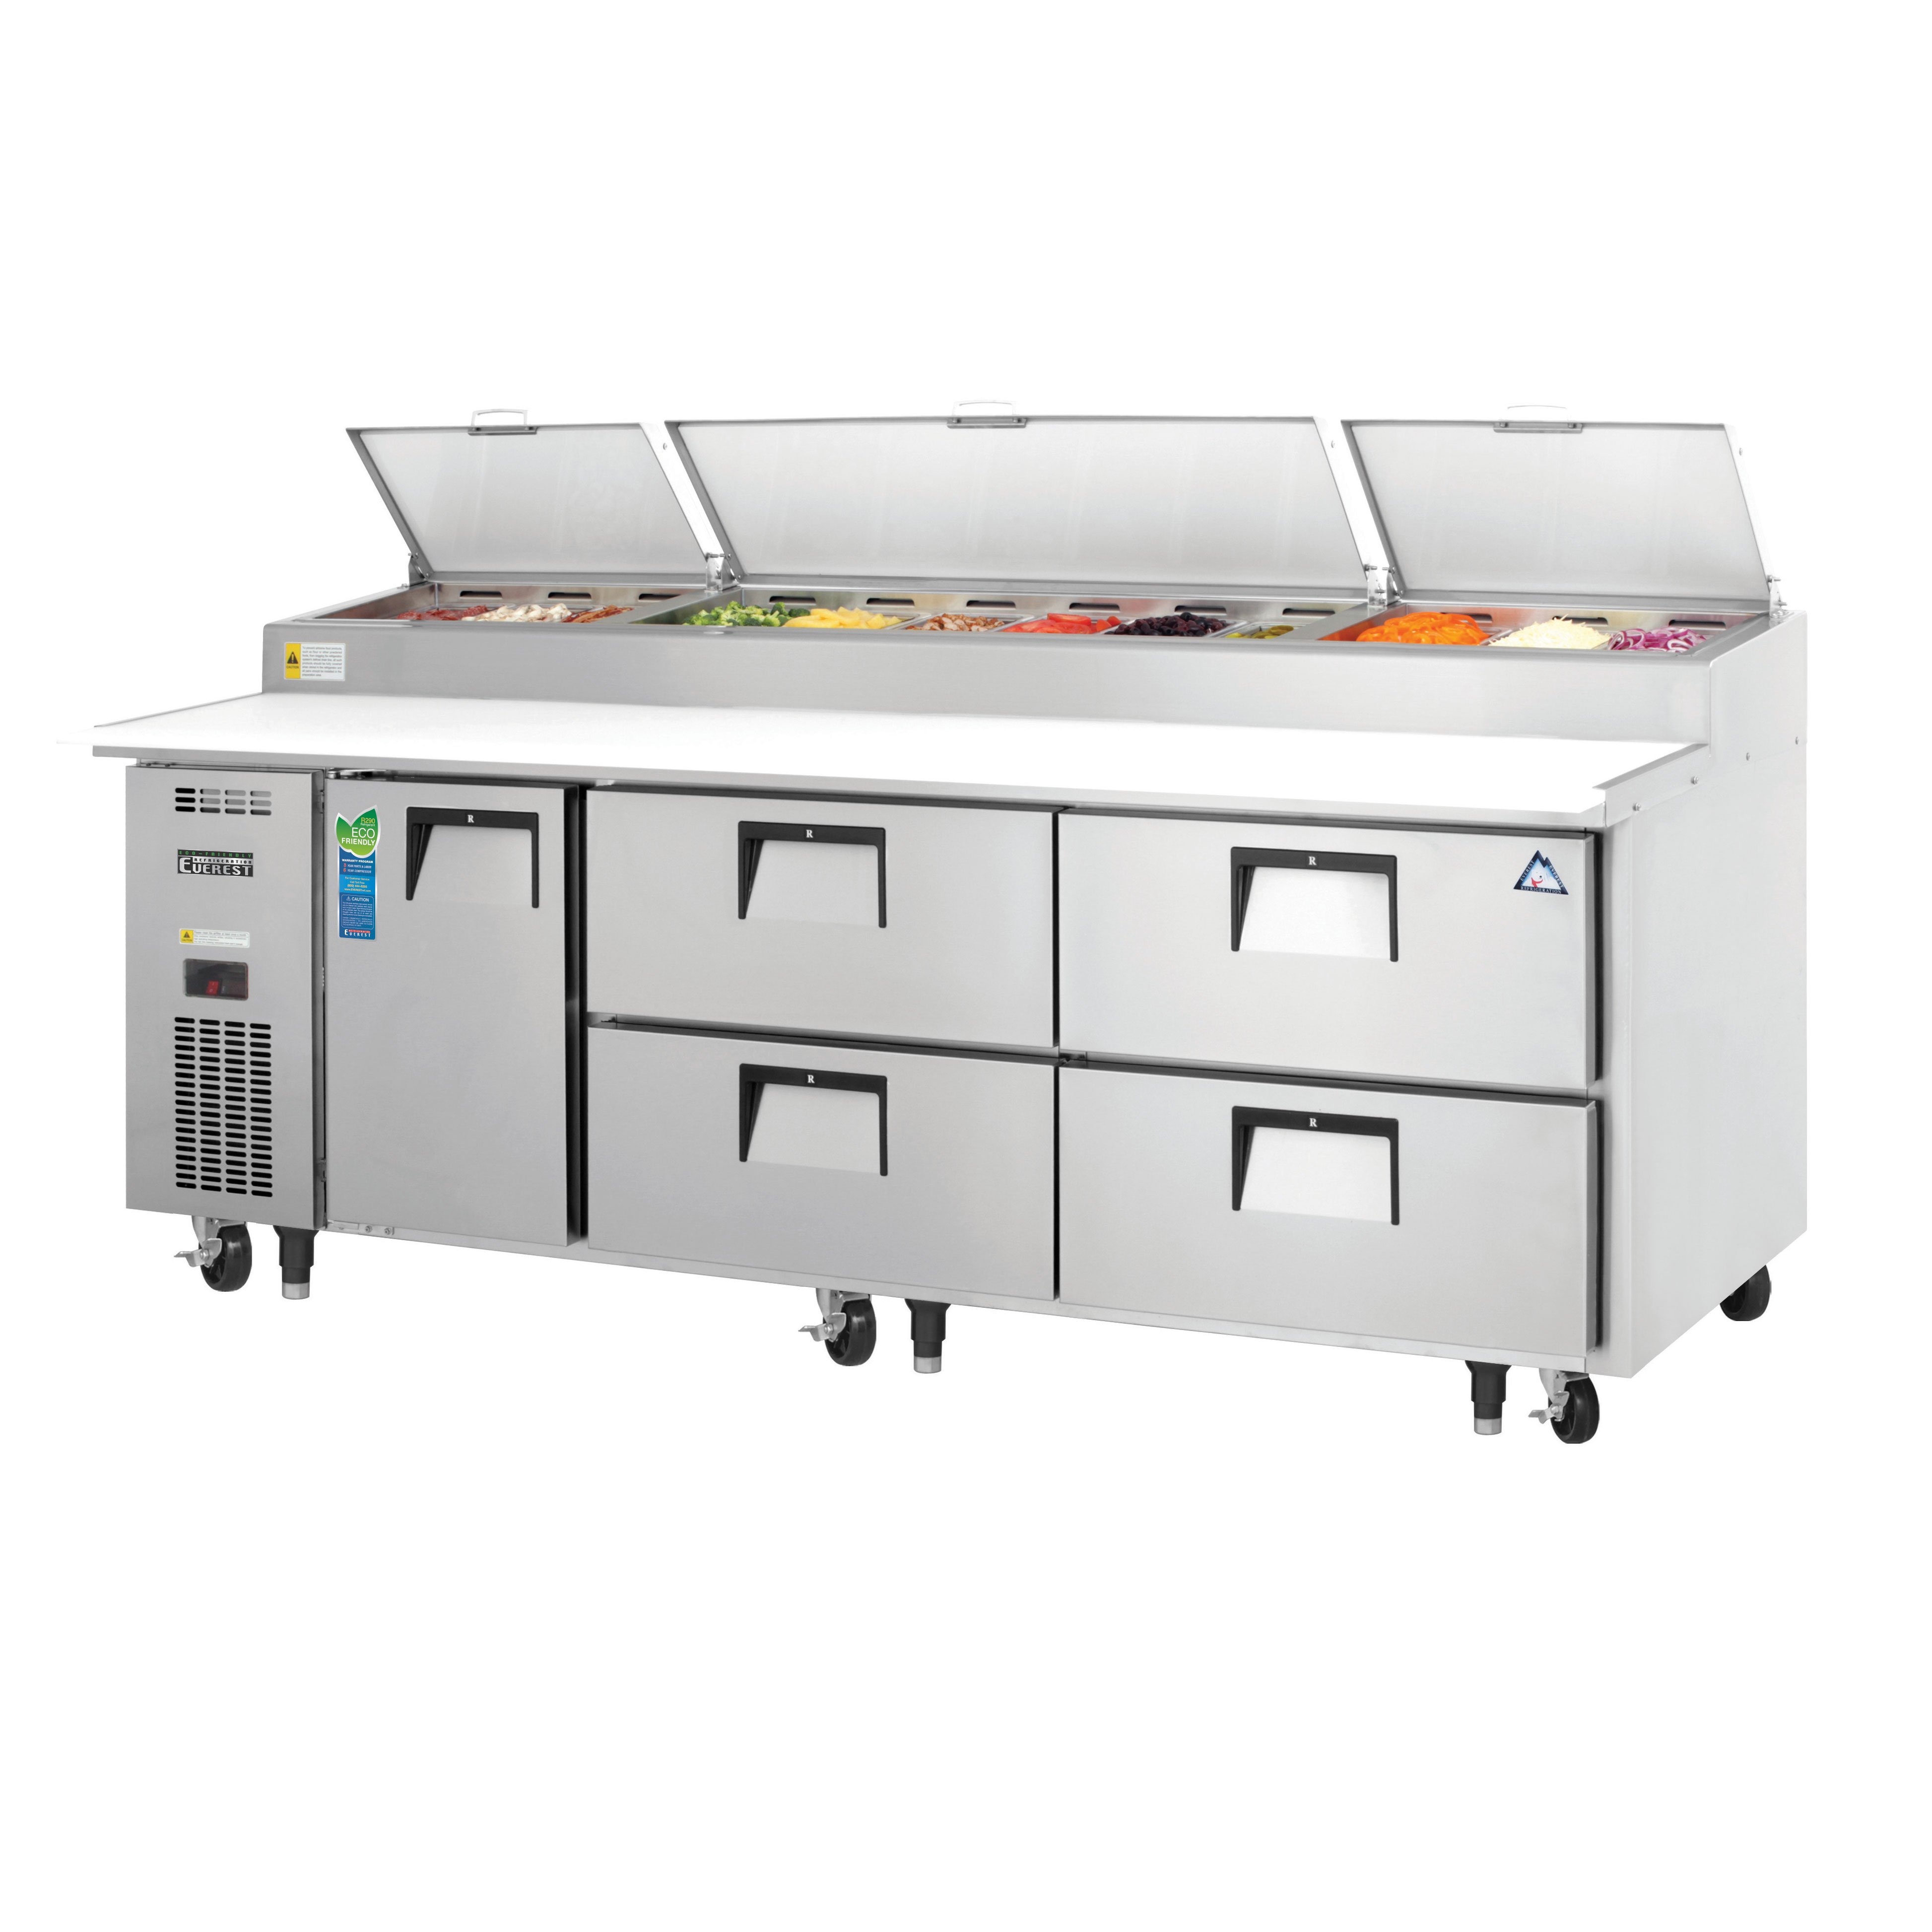 Everest EPPR3-D4 93″ Three Section Drawered Pizza Prep Table, 4 Drawer